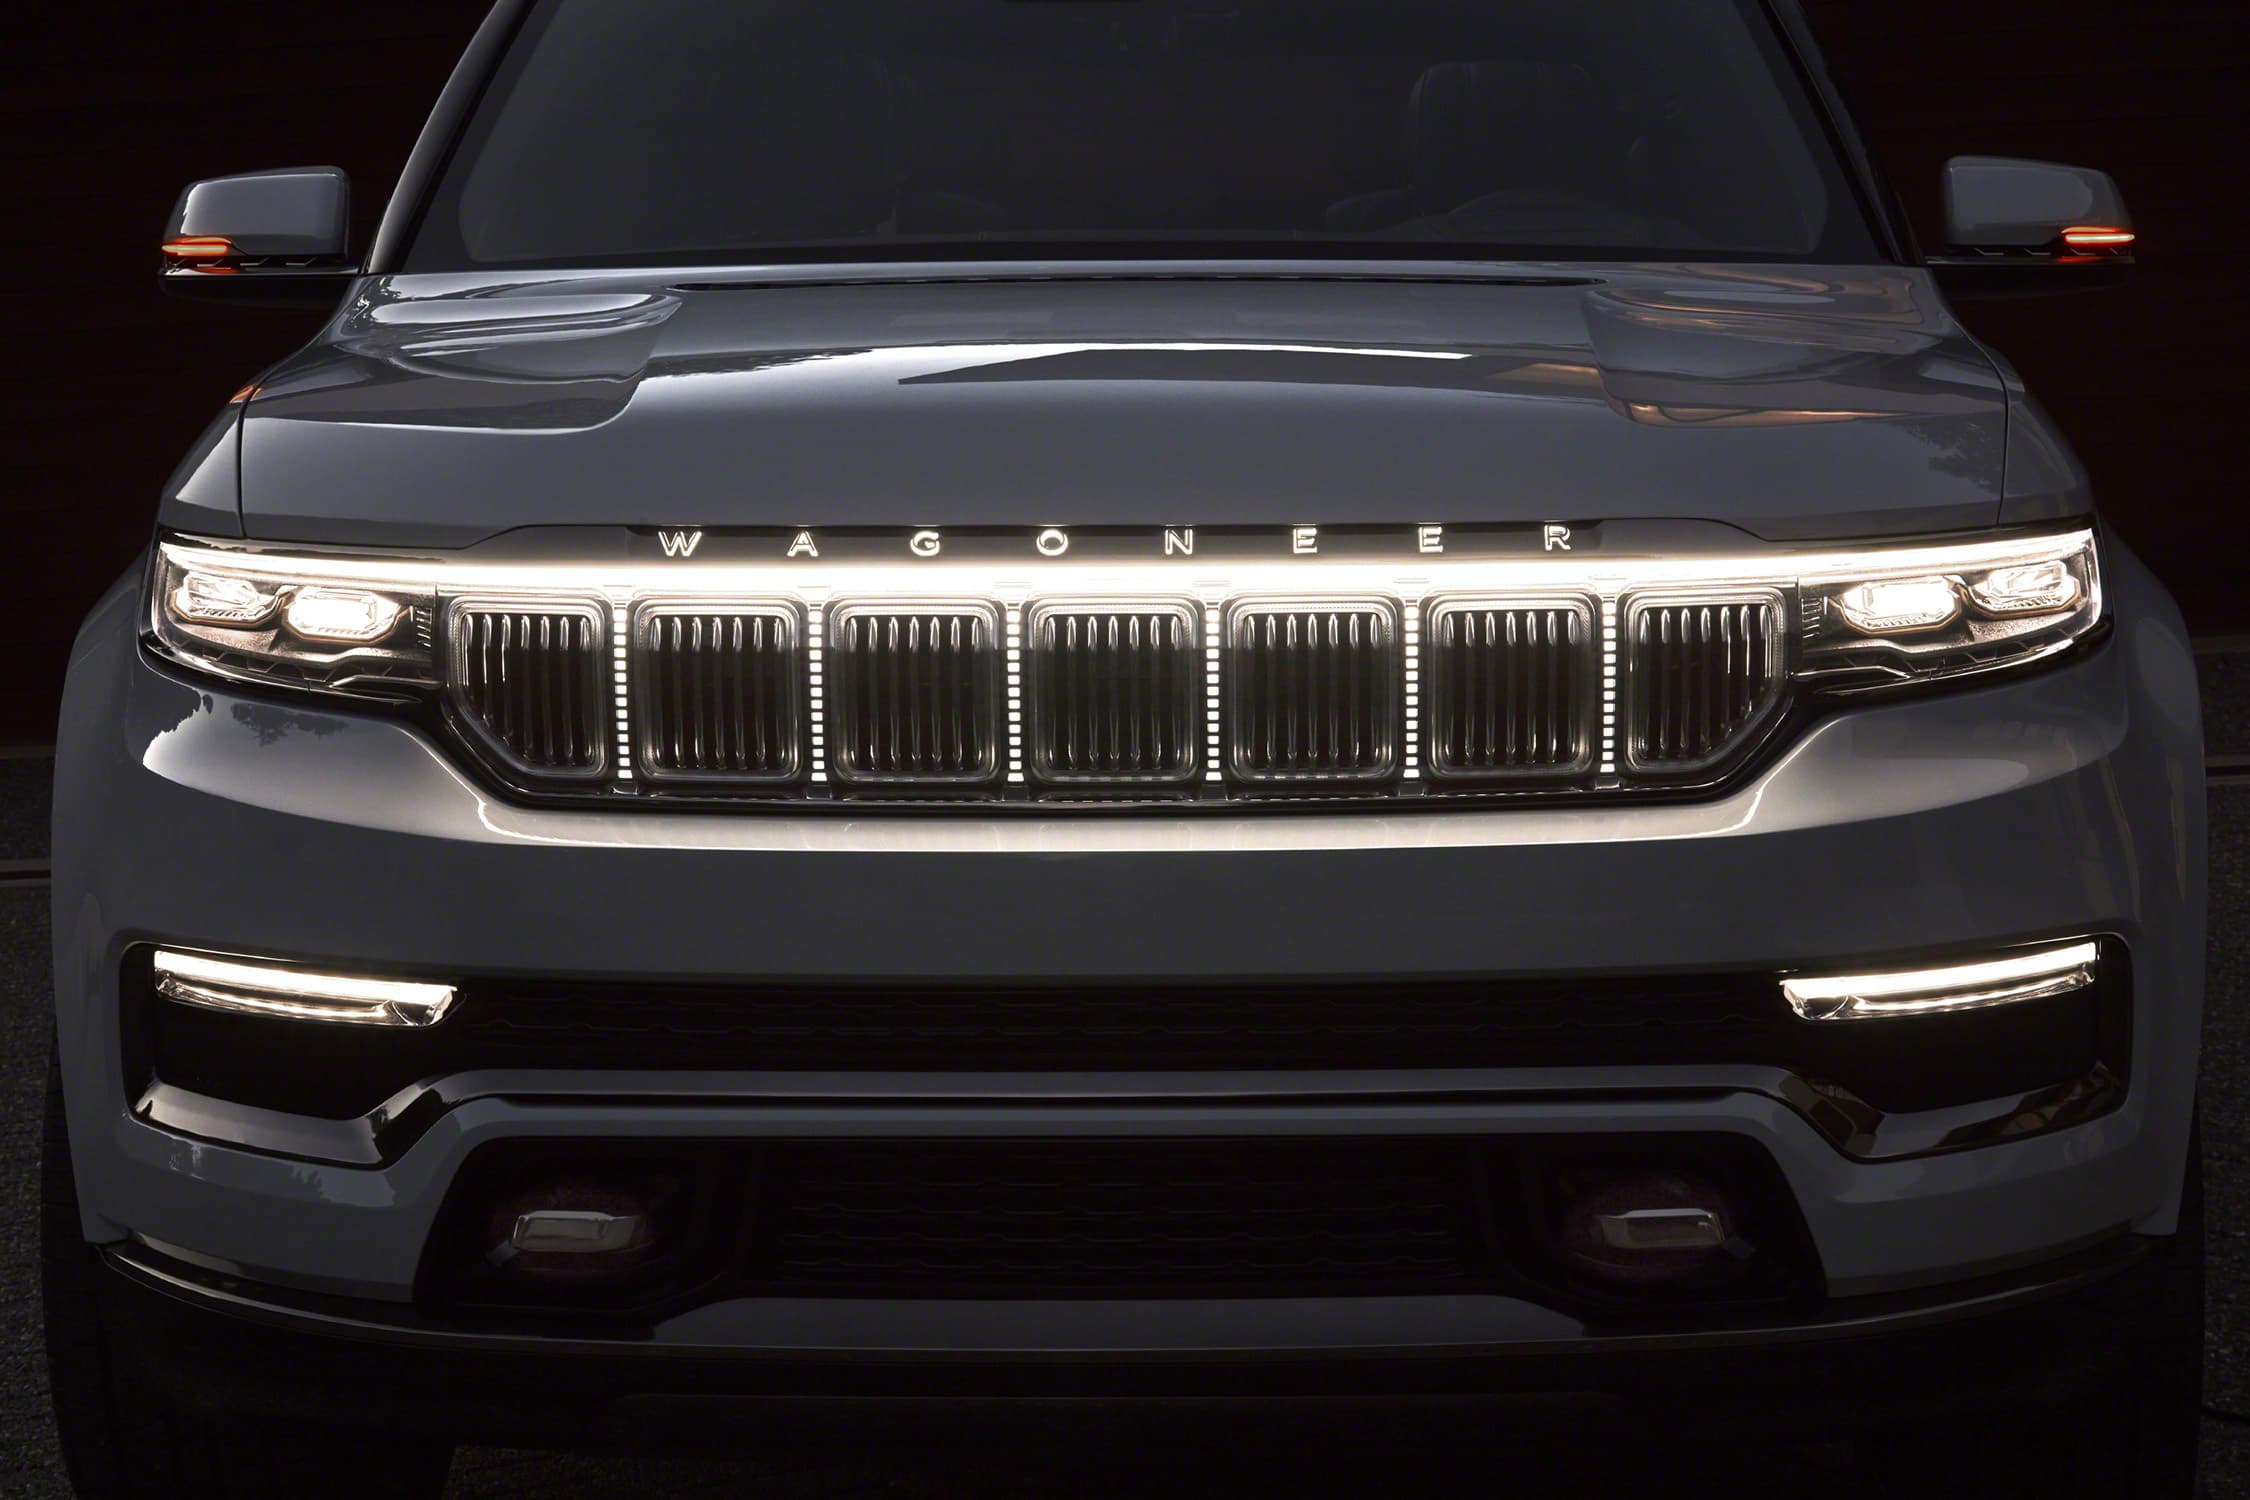 Jeep’s plan to go from gas-guzzling SUVs to ‘green’ off-road EVs